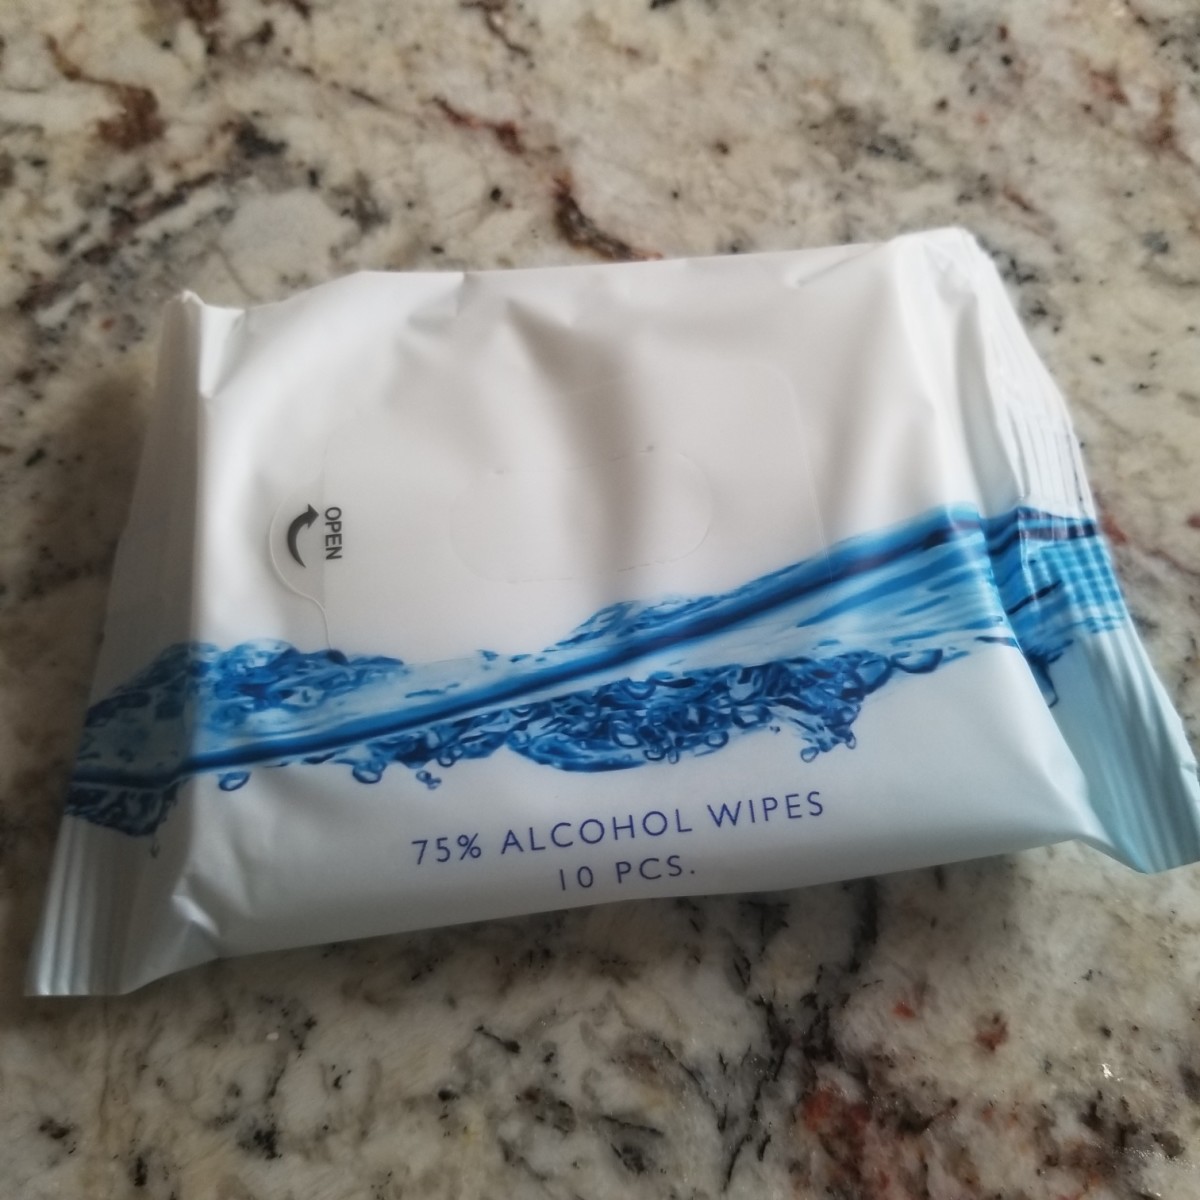 A small, portable package of wipes made it easy to sanitize our hands no matter where we were on the propery. In addition, there were sanitizing dispensers throughout the property.